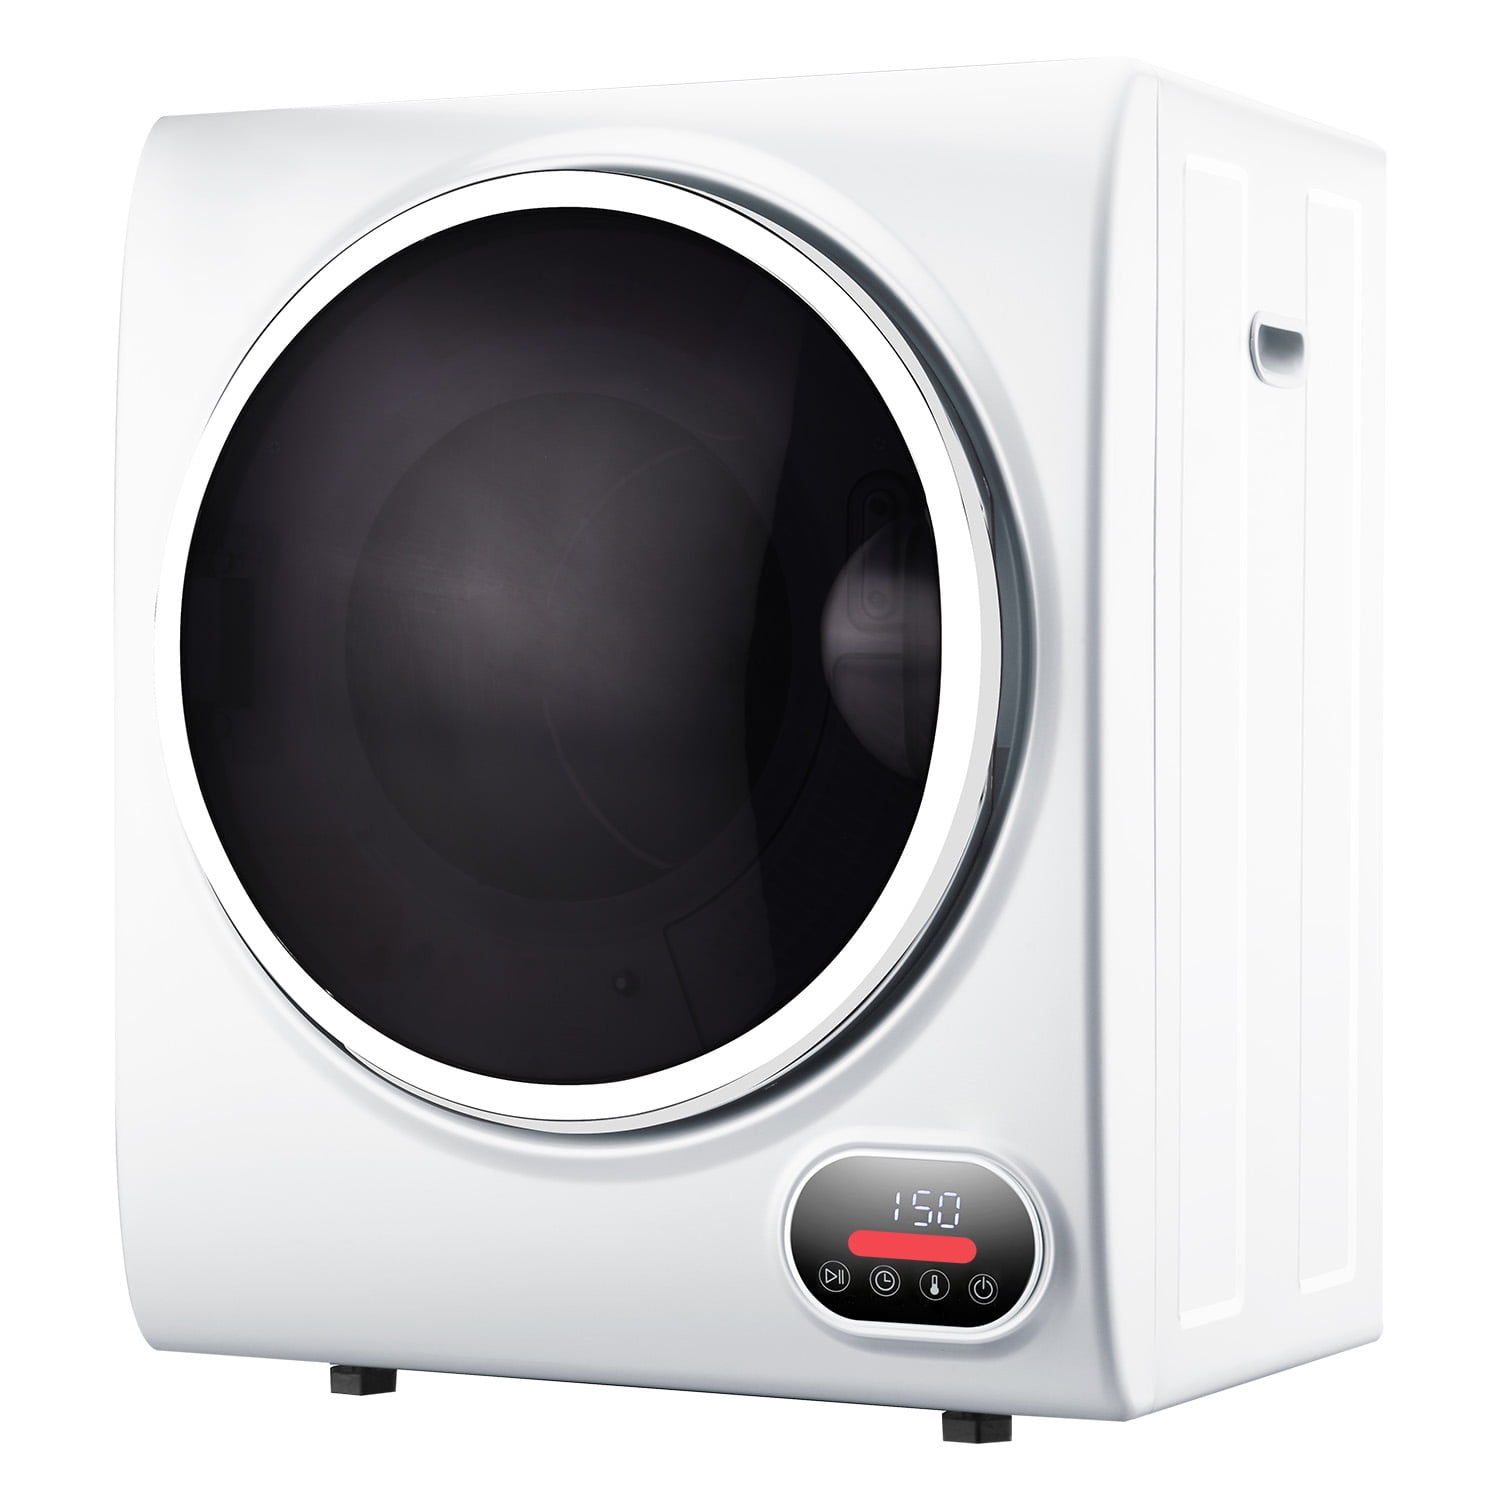 1500W Compact Laundry Dryer with Touch Panel - Costway